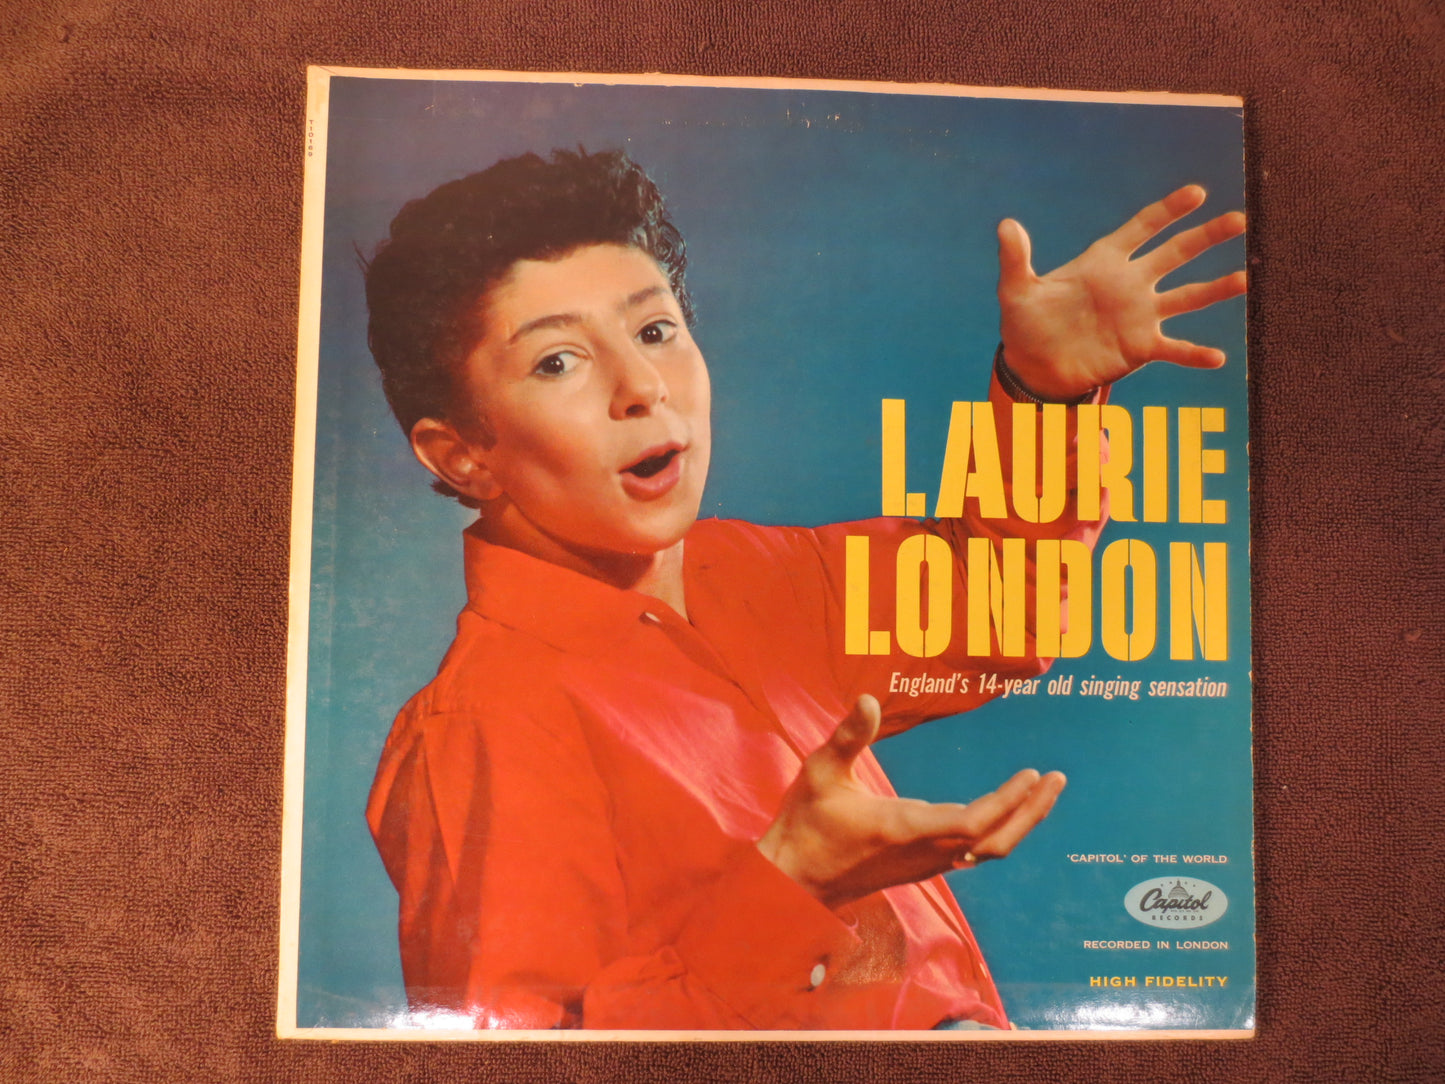 LAURIE LONDON Record, DEBUT Record, Laurie London Album, Laurie London Vinyl, Laurie London Lp, Vintage Pop, 1958 Records